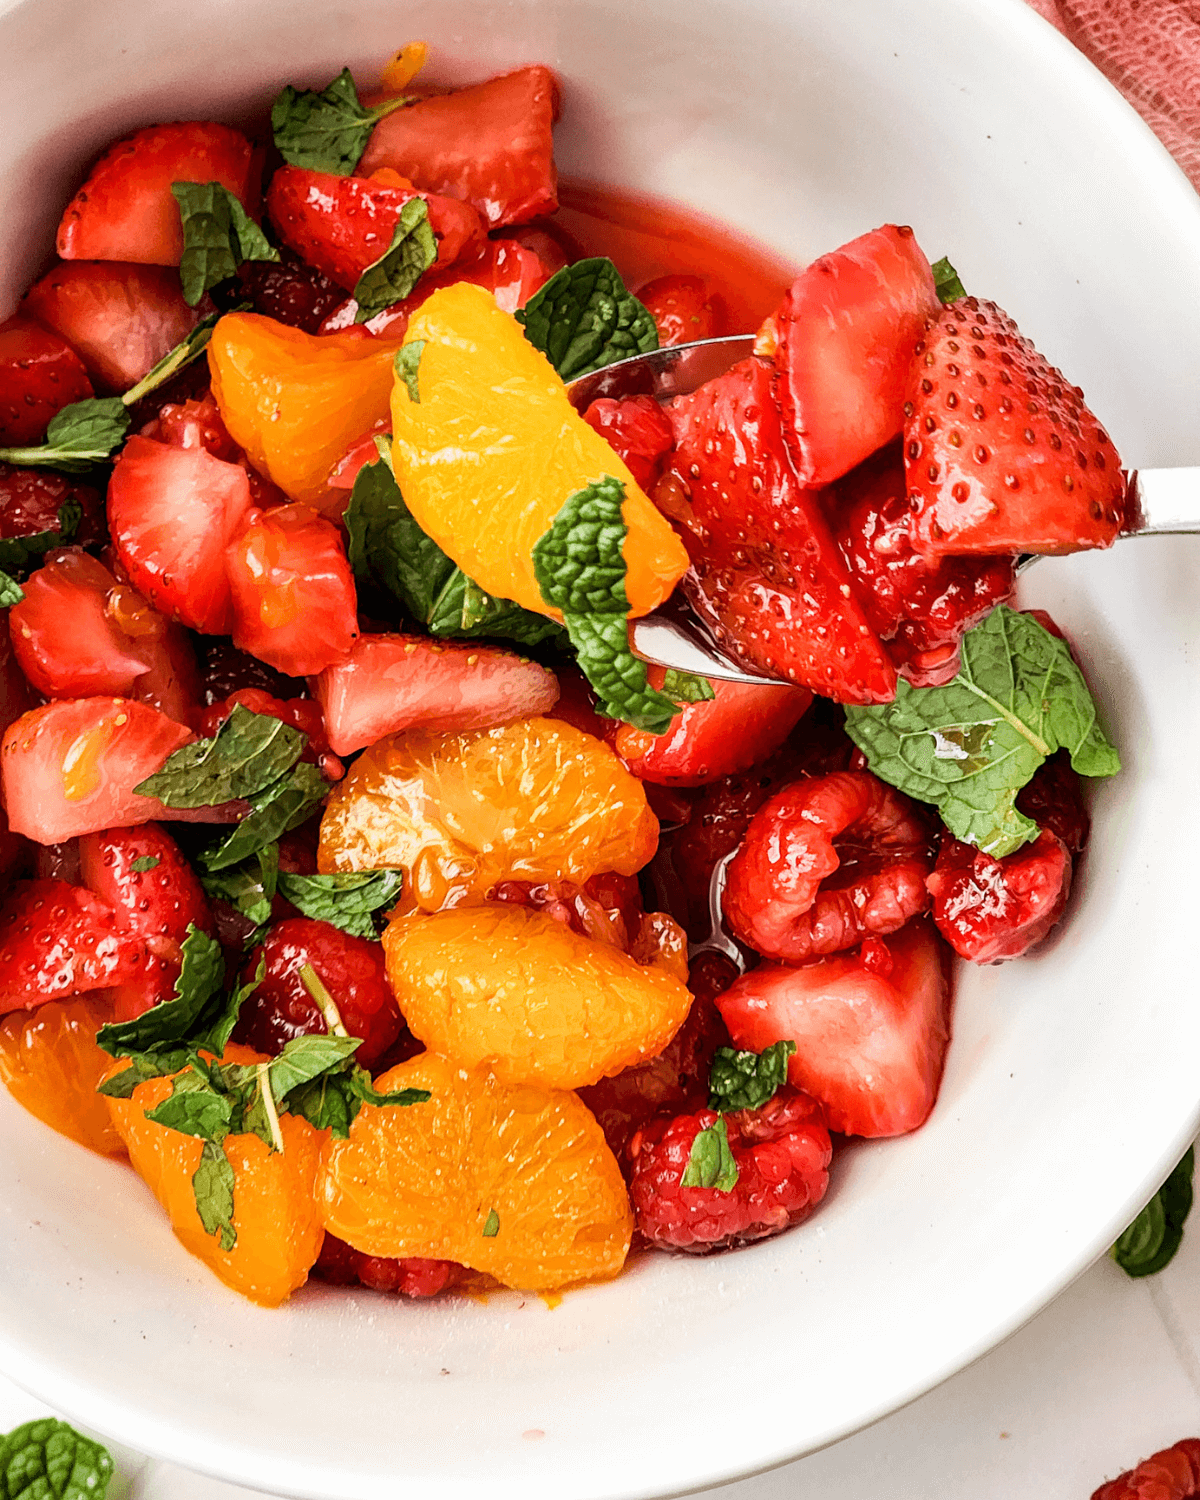 A Berry Breakfast Fruit Salad with Citrus Mint Dressing in a white bowl.